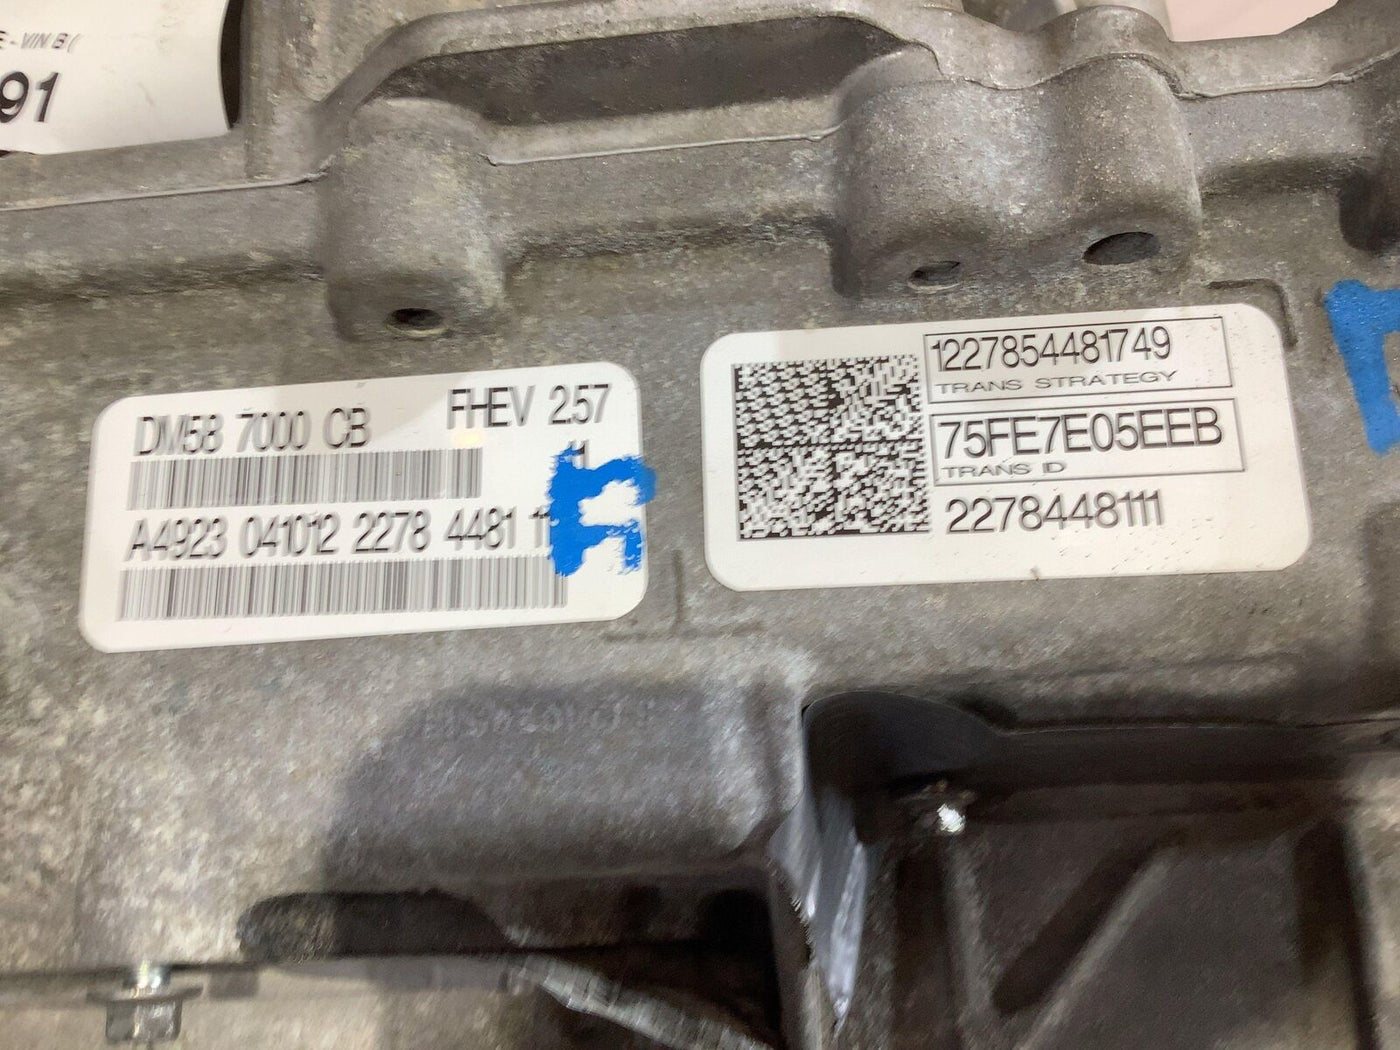 13-15 Ford C-Max Hybrid Automatic Transmission (102K Miles) Unable To Test